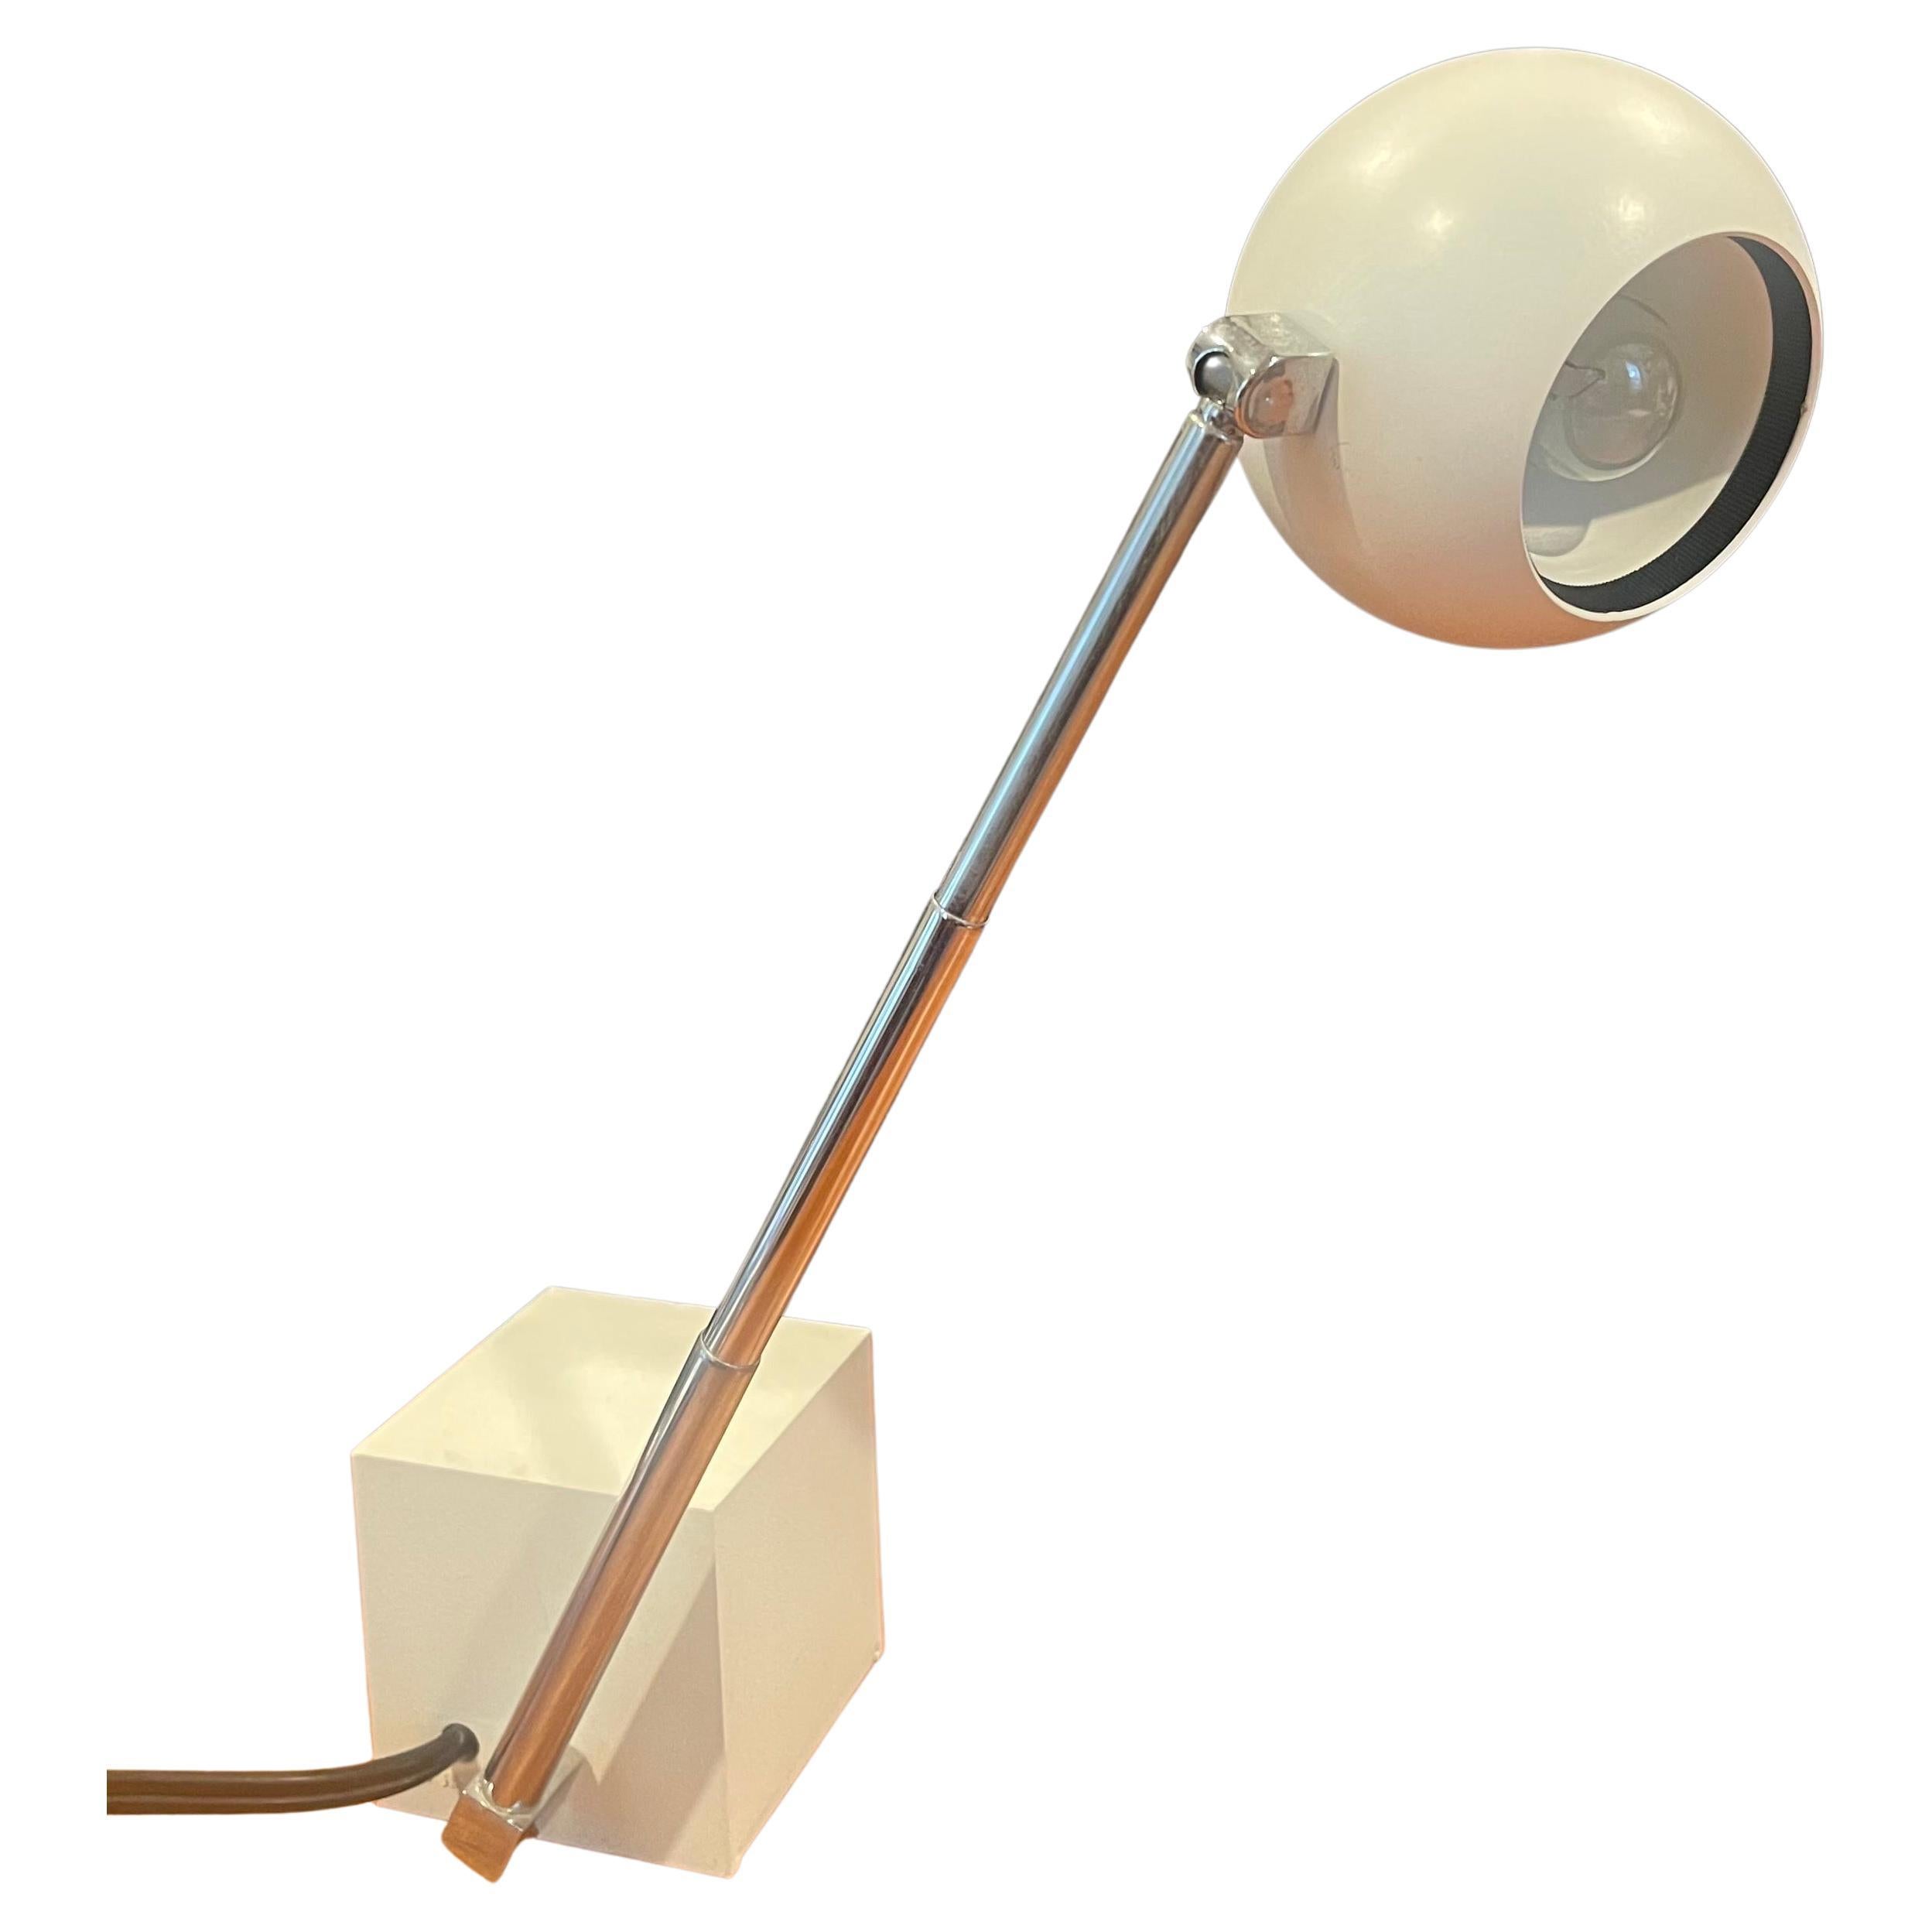 A very nice Lytegem desk lamp in off-white with spherical metal shade, cube base and chrome arm designed by Michael Lax for Lightolier, circa 2000. The lamp was named by the late Industrial designer Jay Doblin as one of the 20th century's hundred